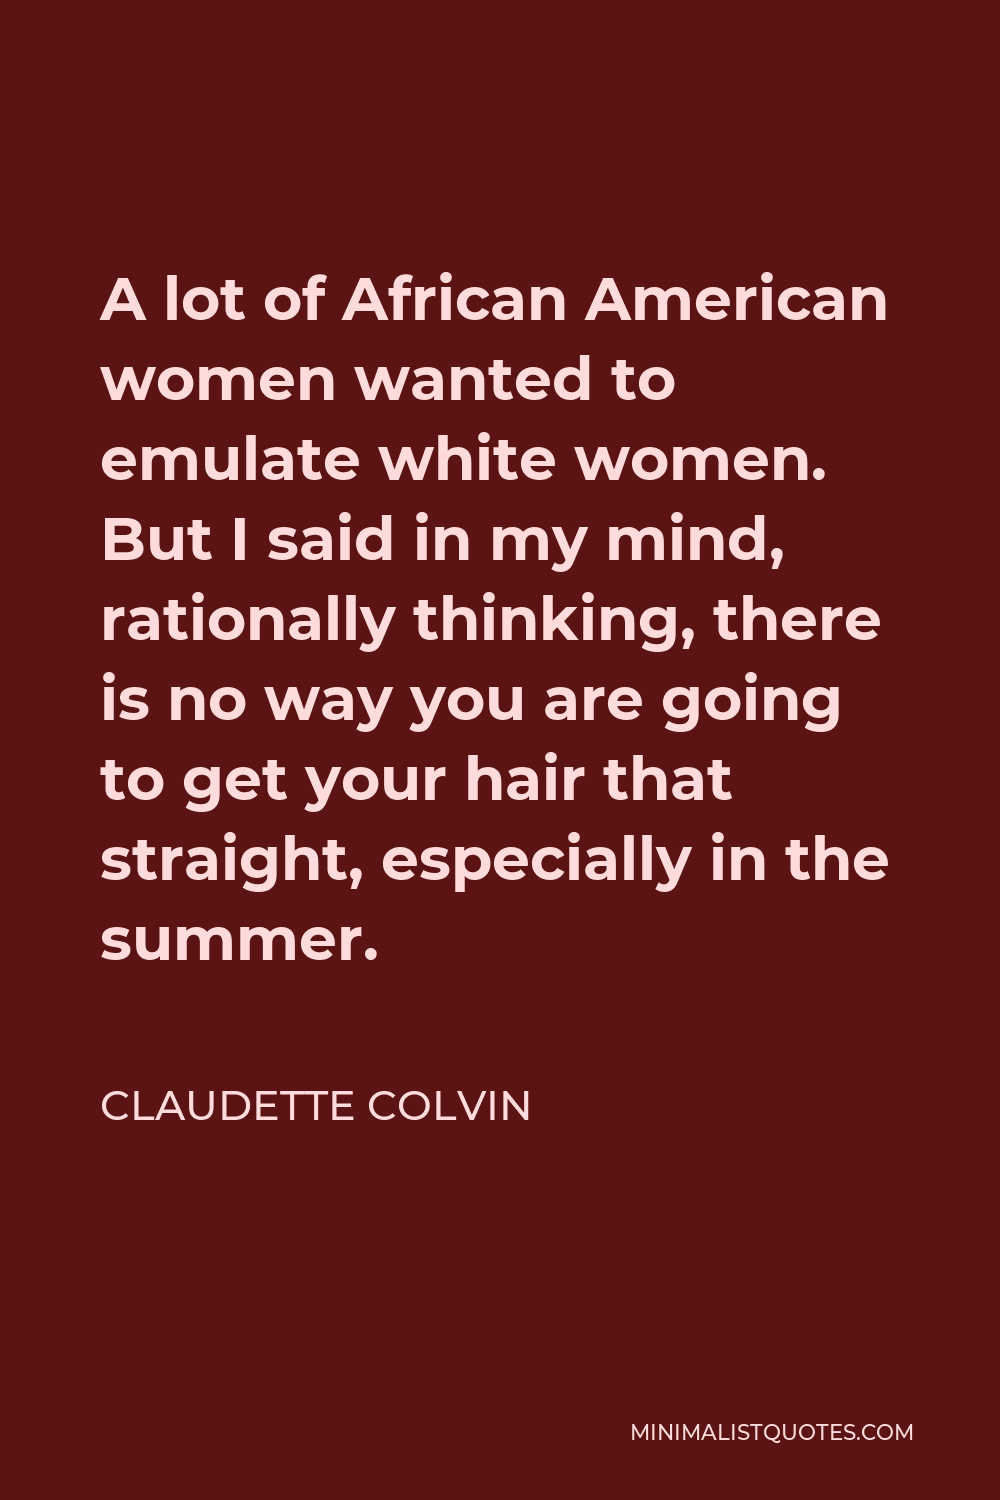 Claudette Colvin Quote - A lot of African American women wanted to emulate white women. But I said in my mind, rationally thinking, there is no way you are going to get your hair that straight, especially in the summer.